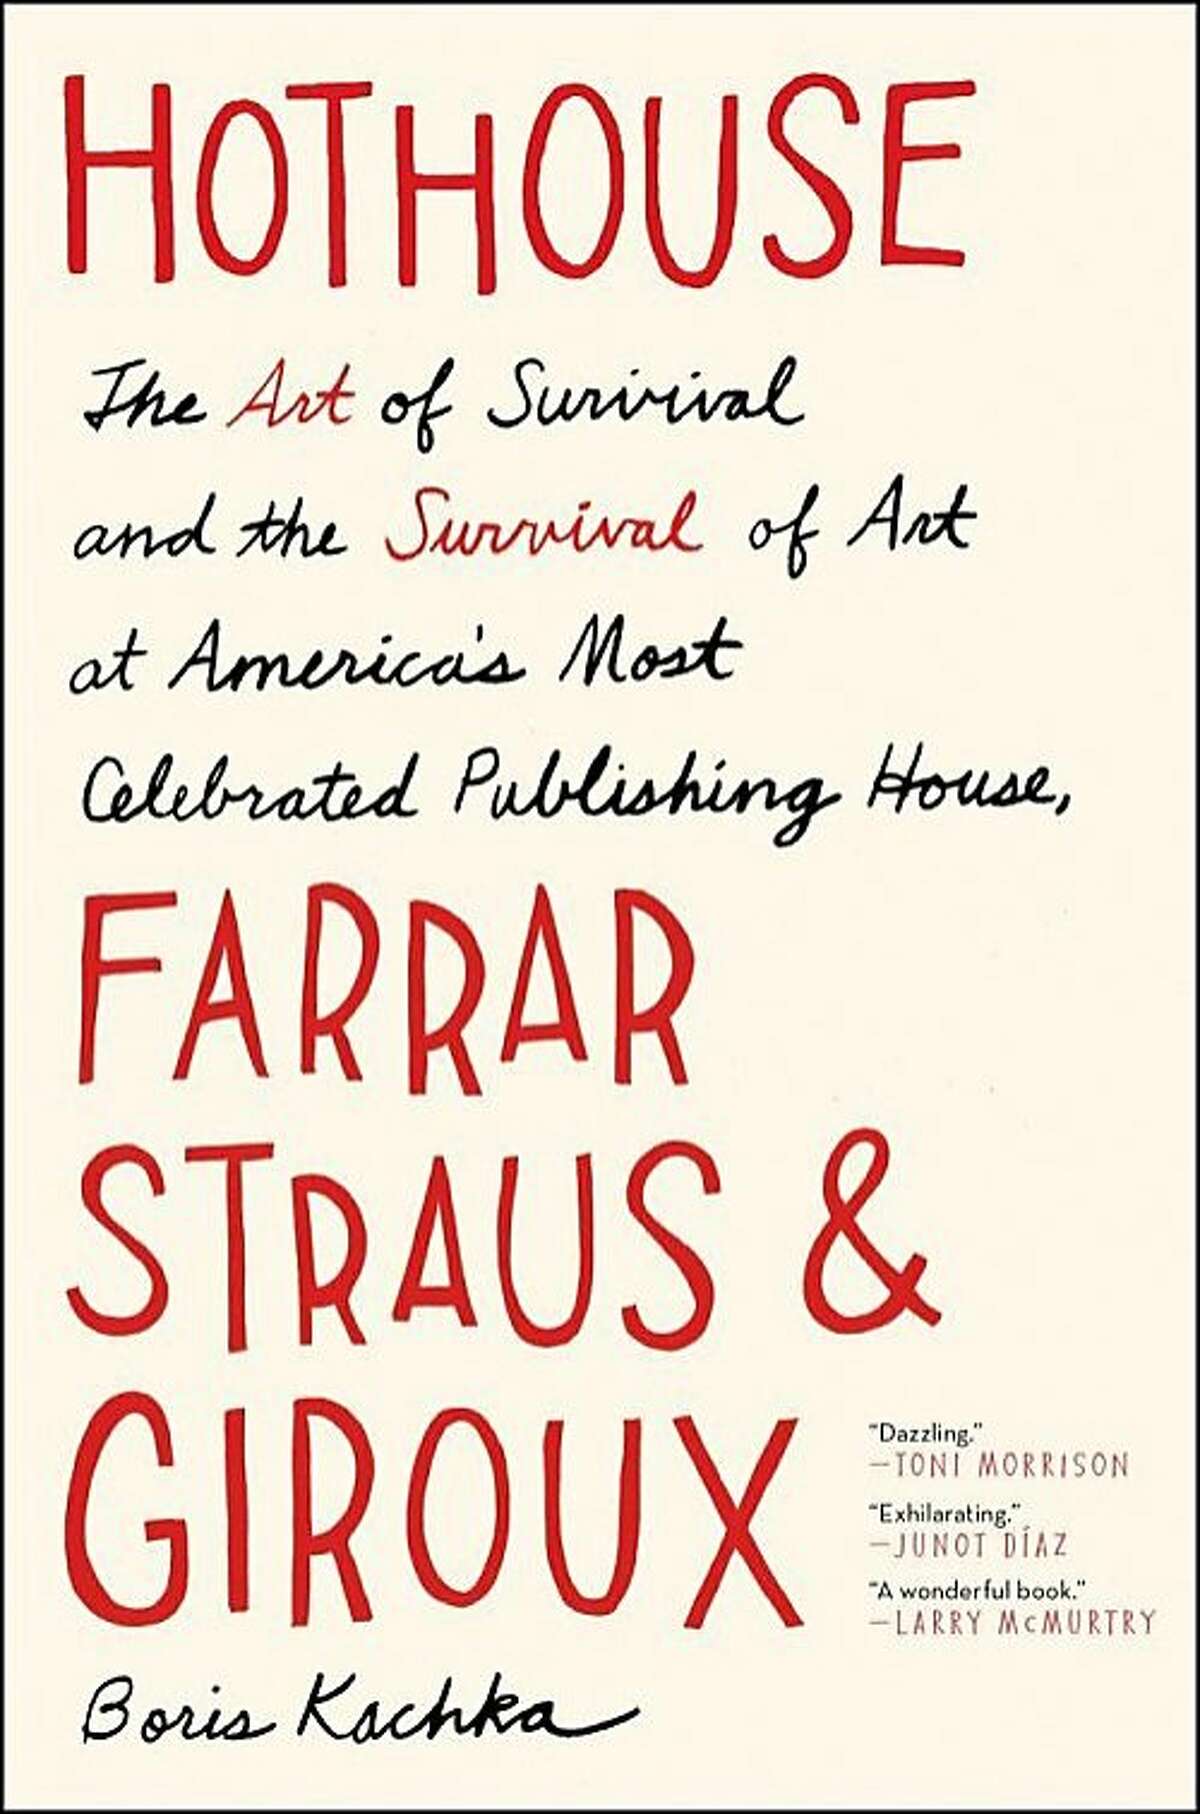 Hothouse: The Art of Survival and the Survival of Art at America's Most Celebrated Publishing House, Farrar, Straus, and Giroux, by Boris Kachka